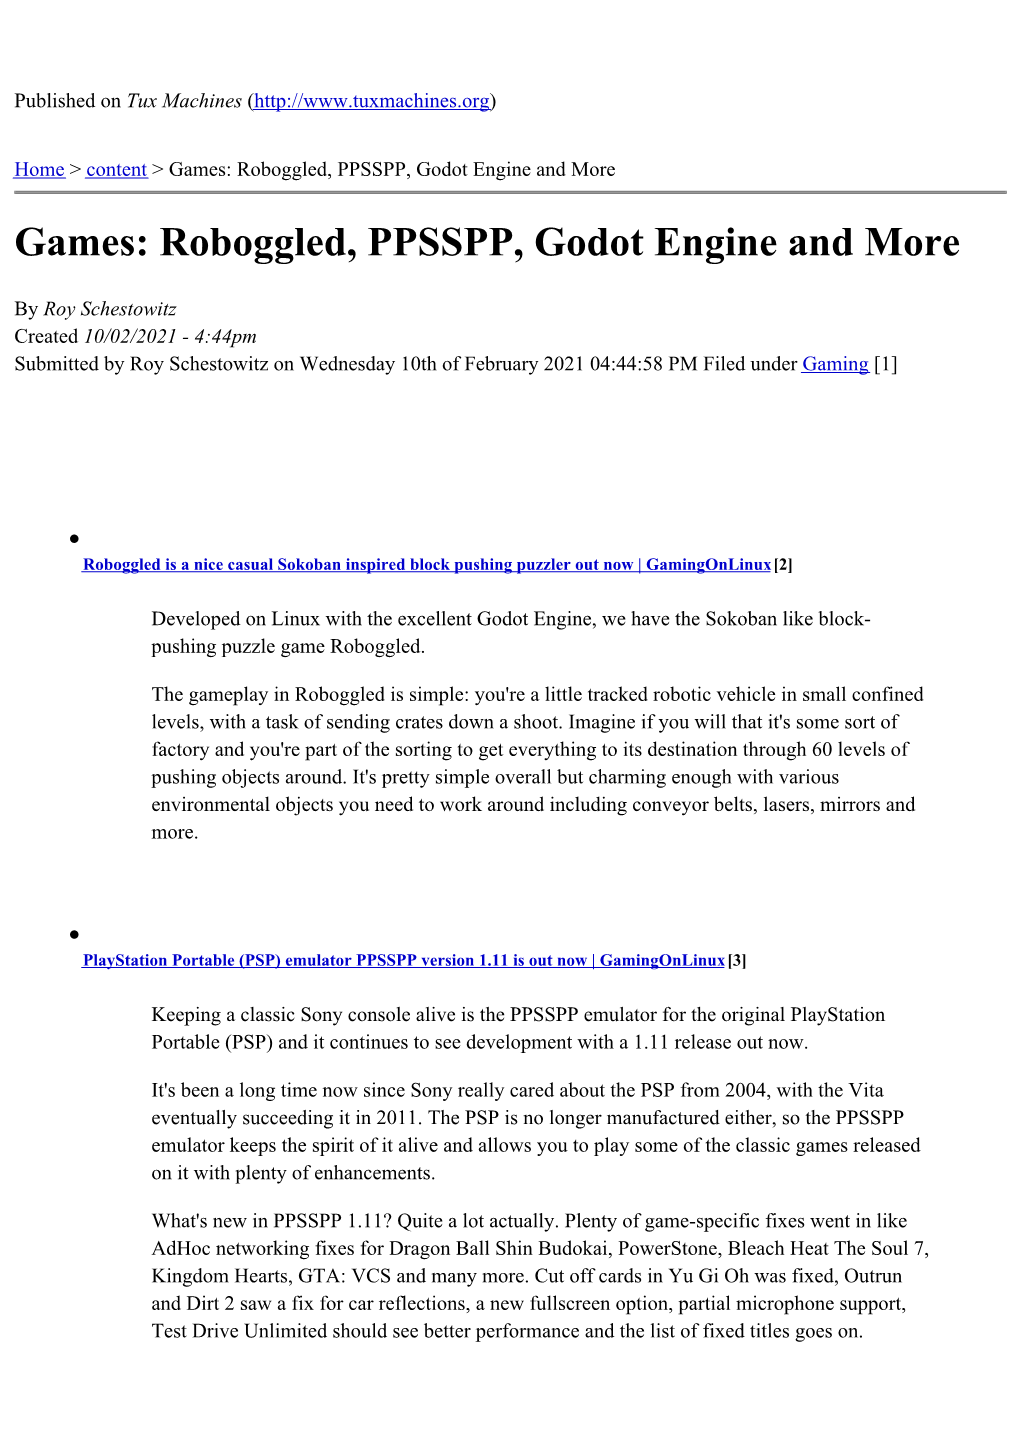 Games: Roboggled, PPSSPP, Godot Engine and More